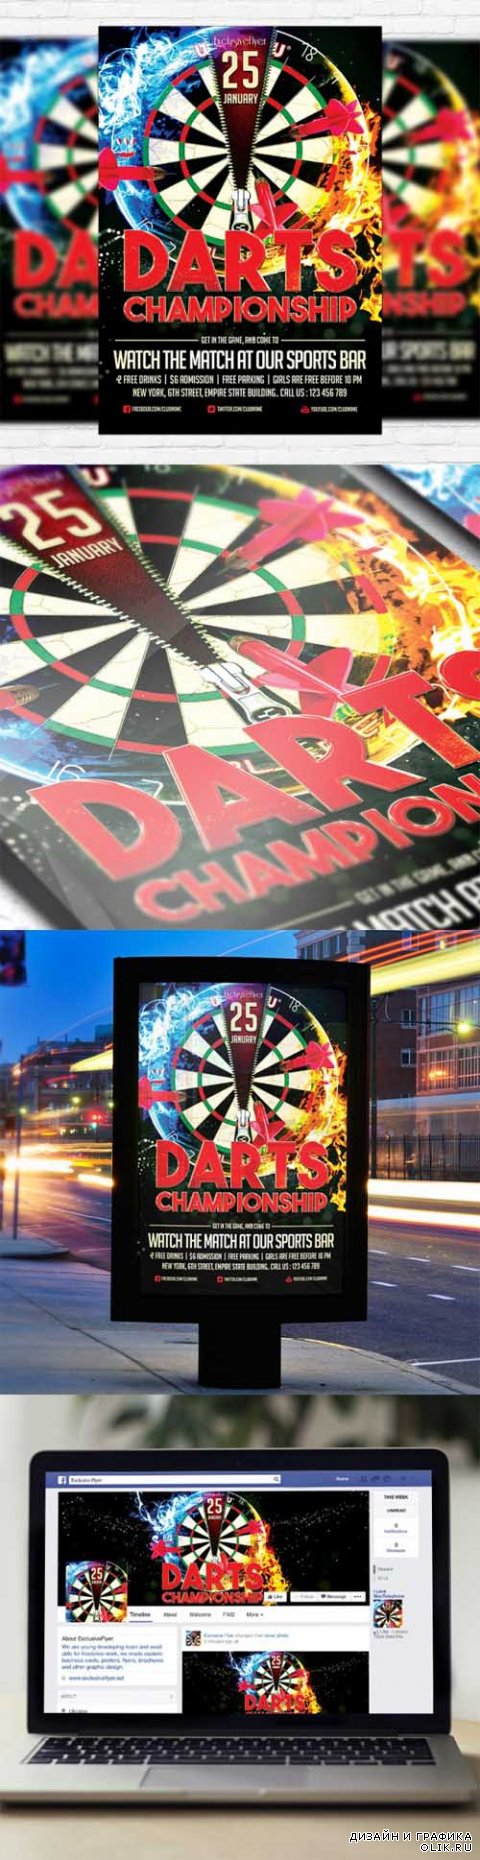 Flyer Template - Darts Championship + Facebook Cover